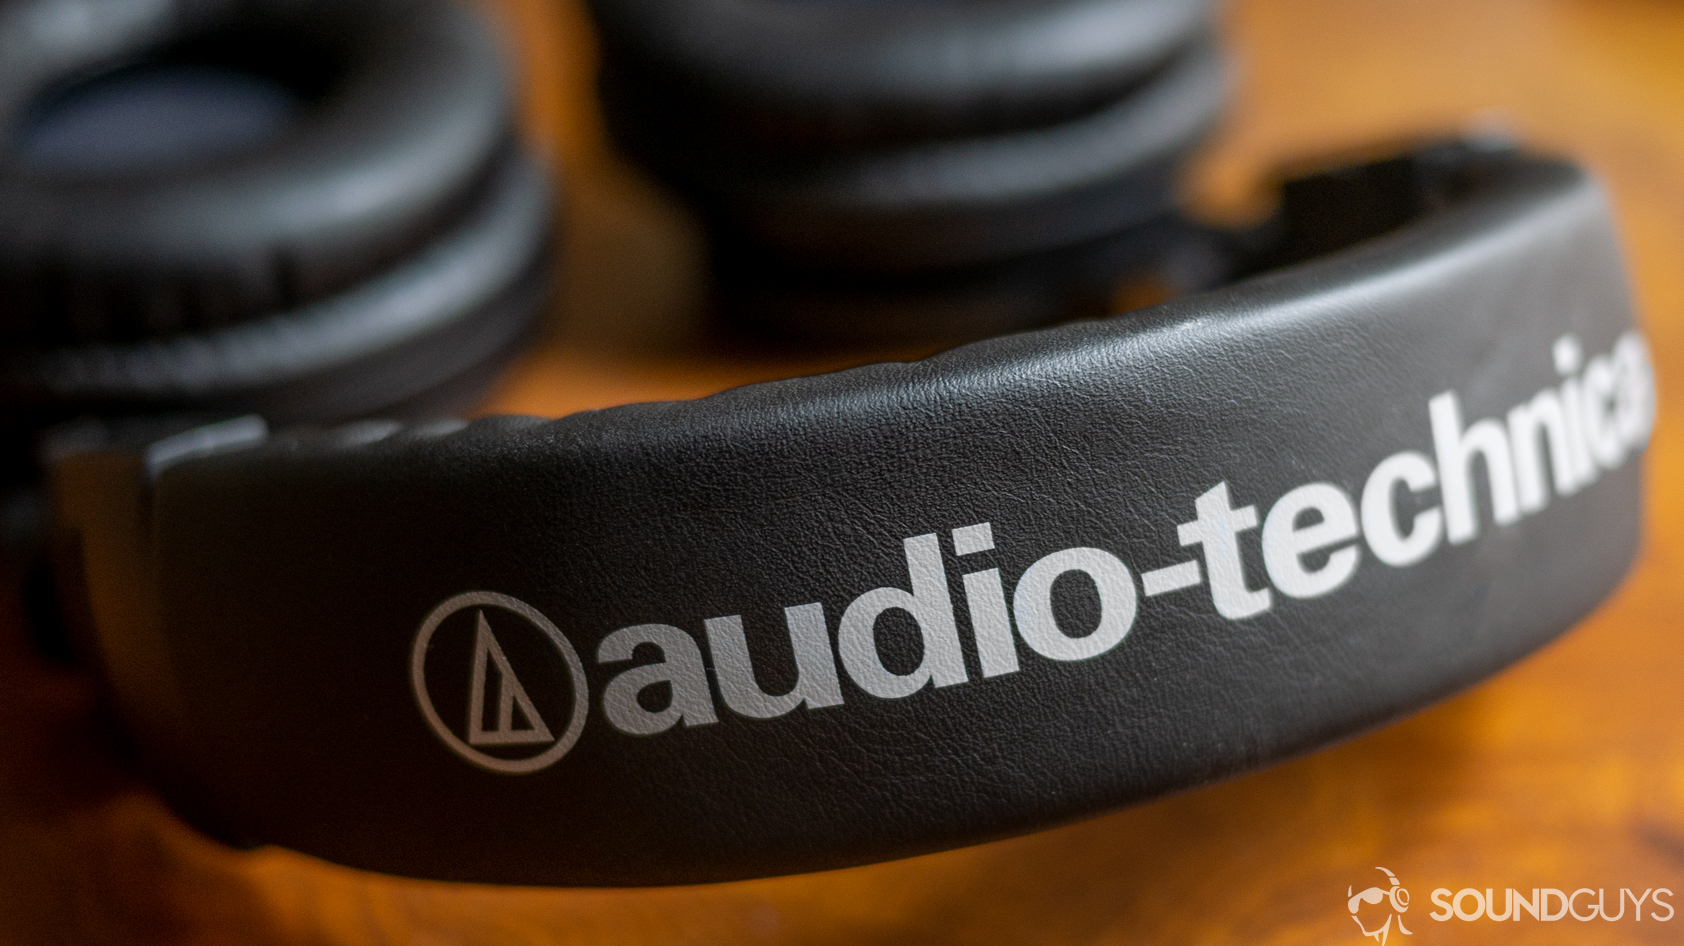 A photo of the Audio-Technica ATH-M50xBT on a wooden desk.